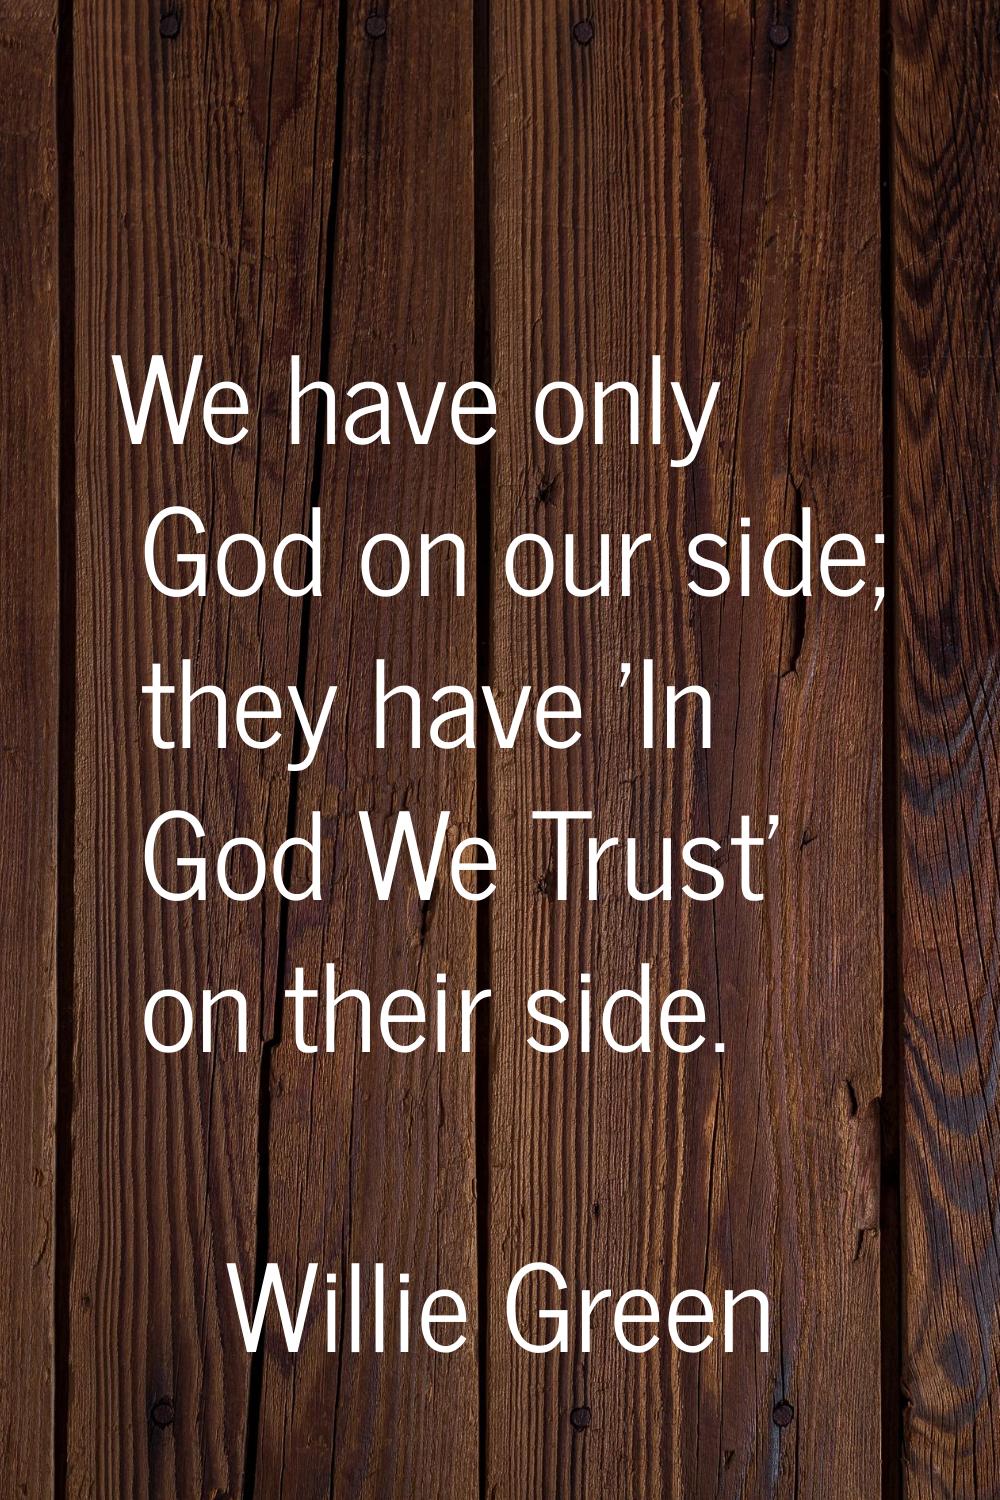 We have only God on our side; they have 'In God We Trust' on their side.